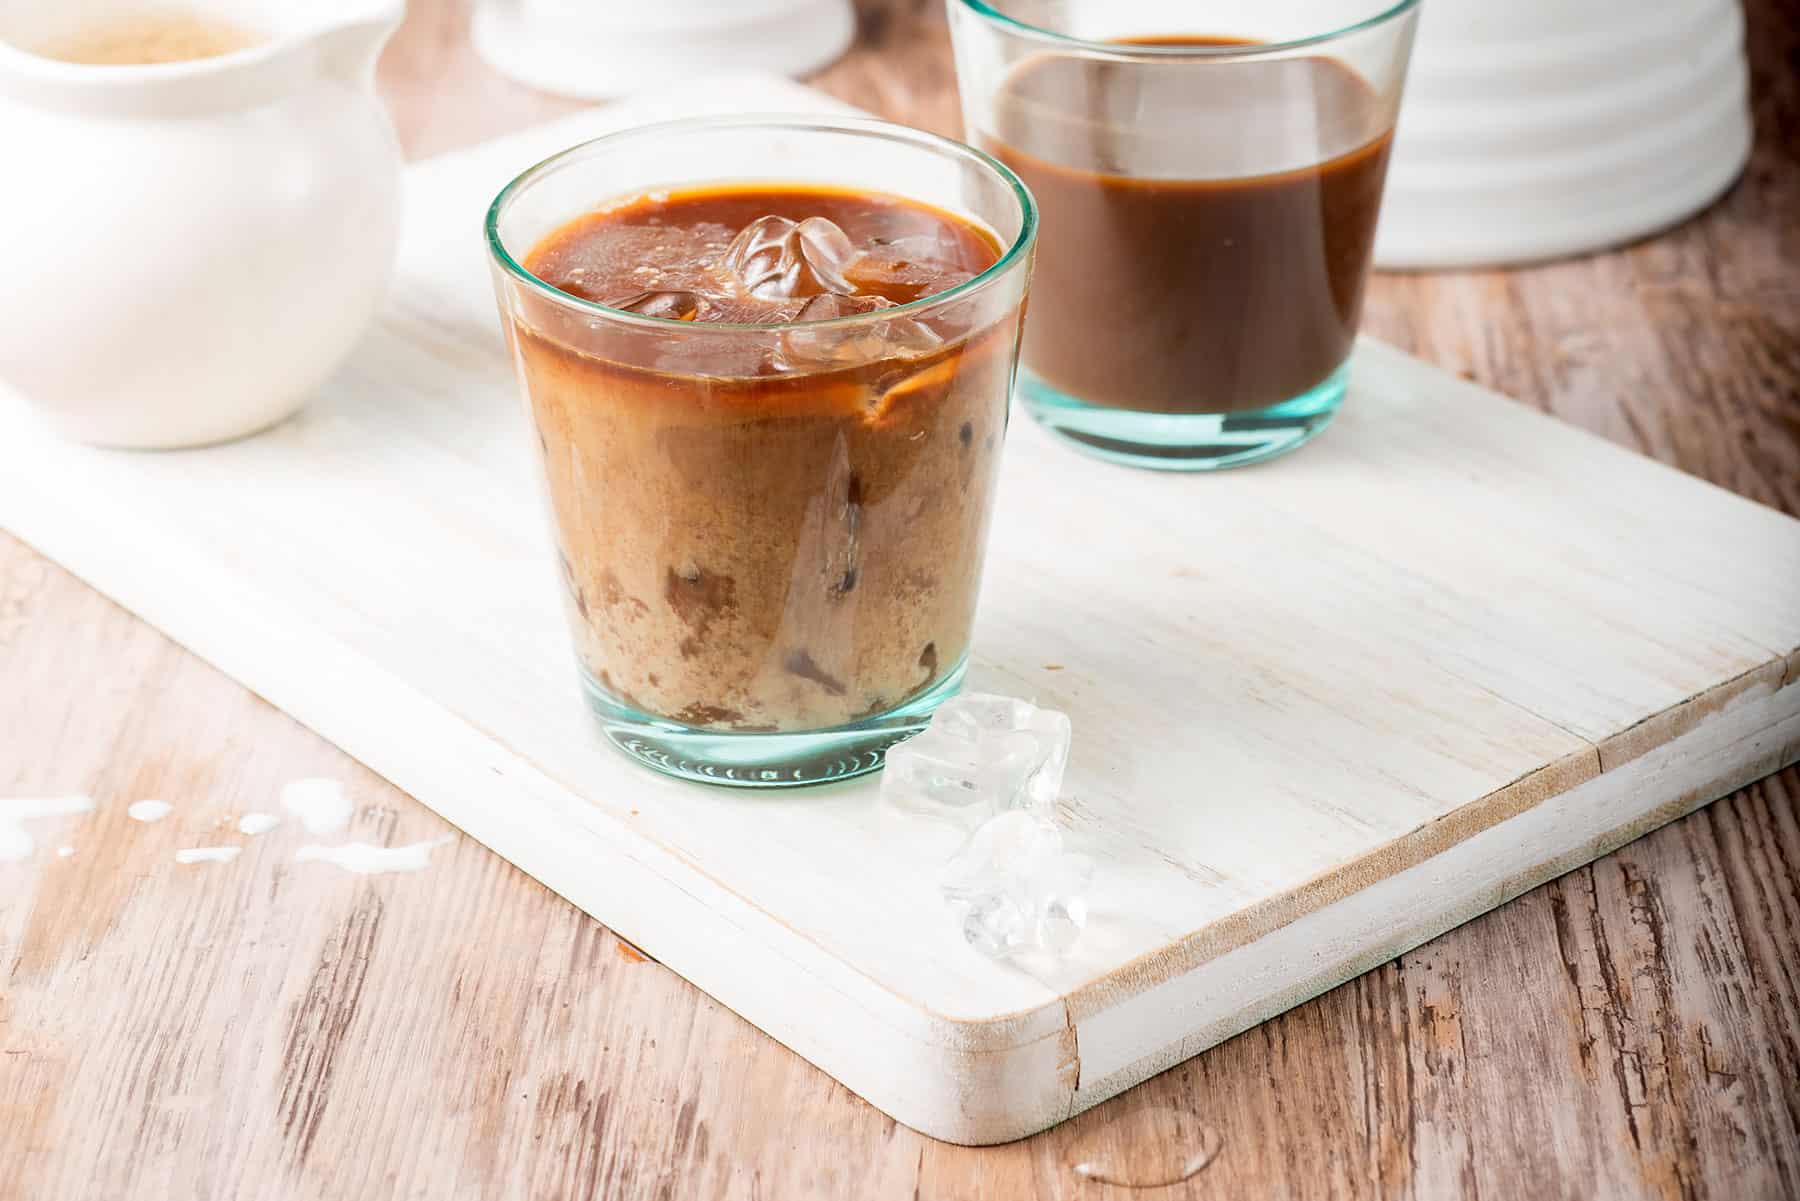 Easy, creamy, cold chocolate drink.